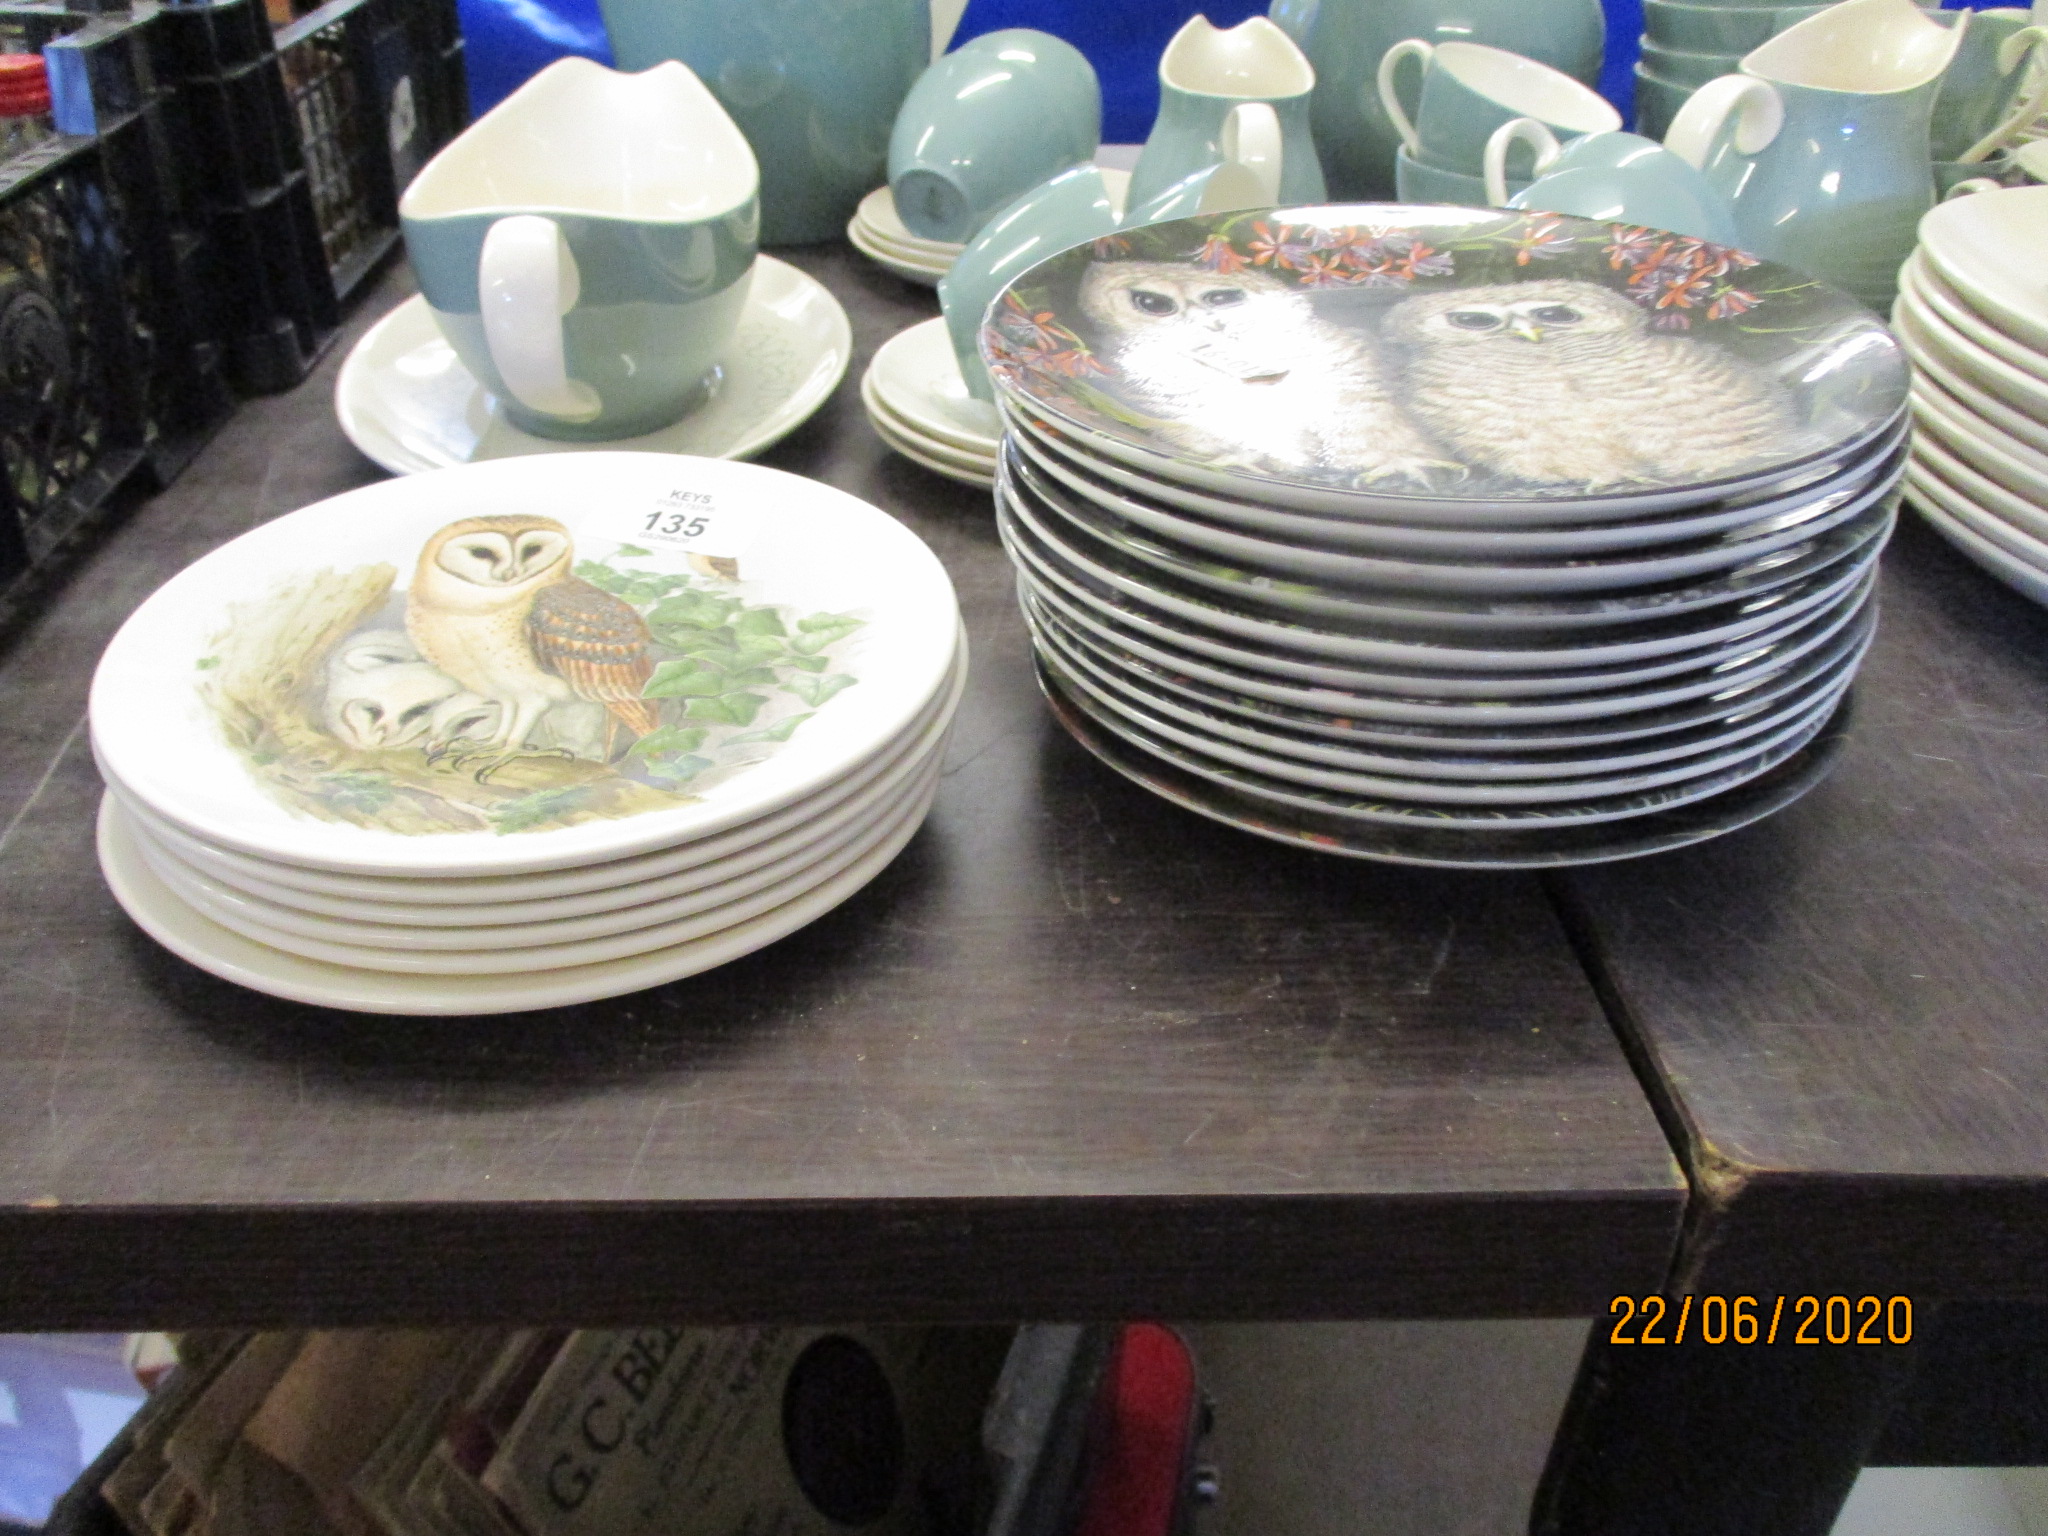 COLLECTION OF WEDGWOOD “BABY OWLS” PLATES (12) TOGETHER WITH A COLLECTION OF POOLE OWL THEMED PLATES - Image 2 of 2